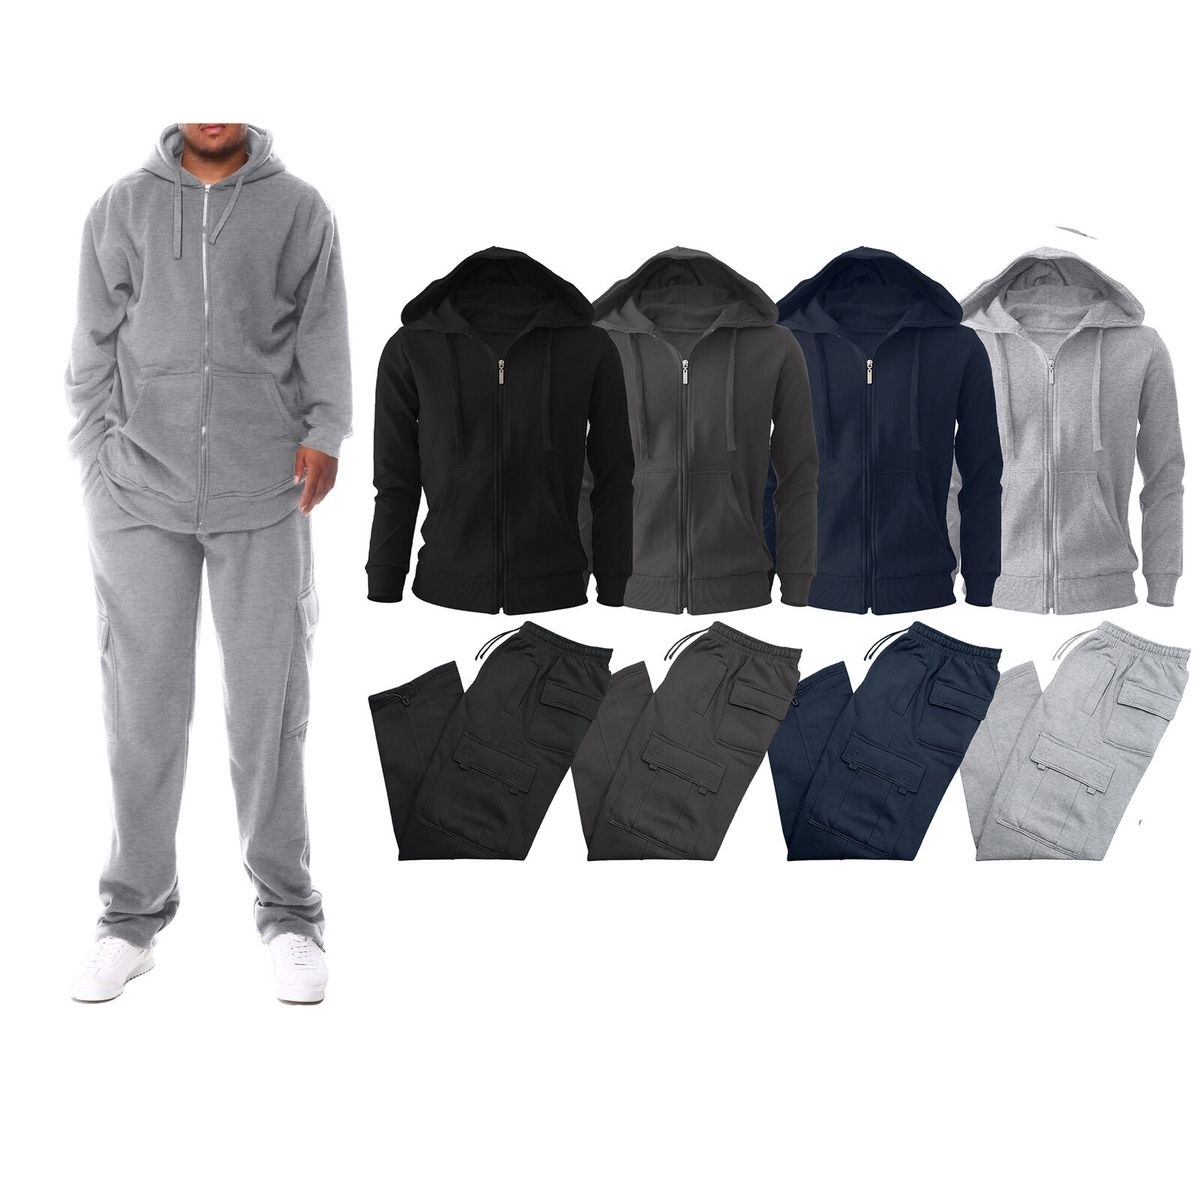 2-Pack: Men's Big & Tall Winter Warm Athletic Active Cozy Fleece Lined Multi-Pocket Full Zip Up Cargo Tracksuit - Navy, 3xl